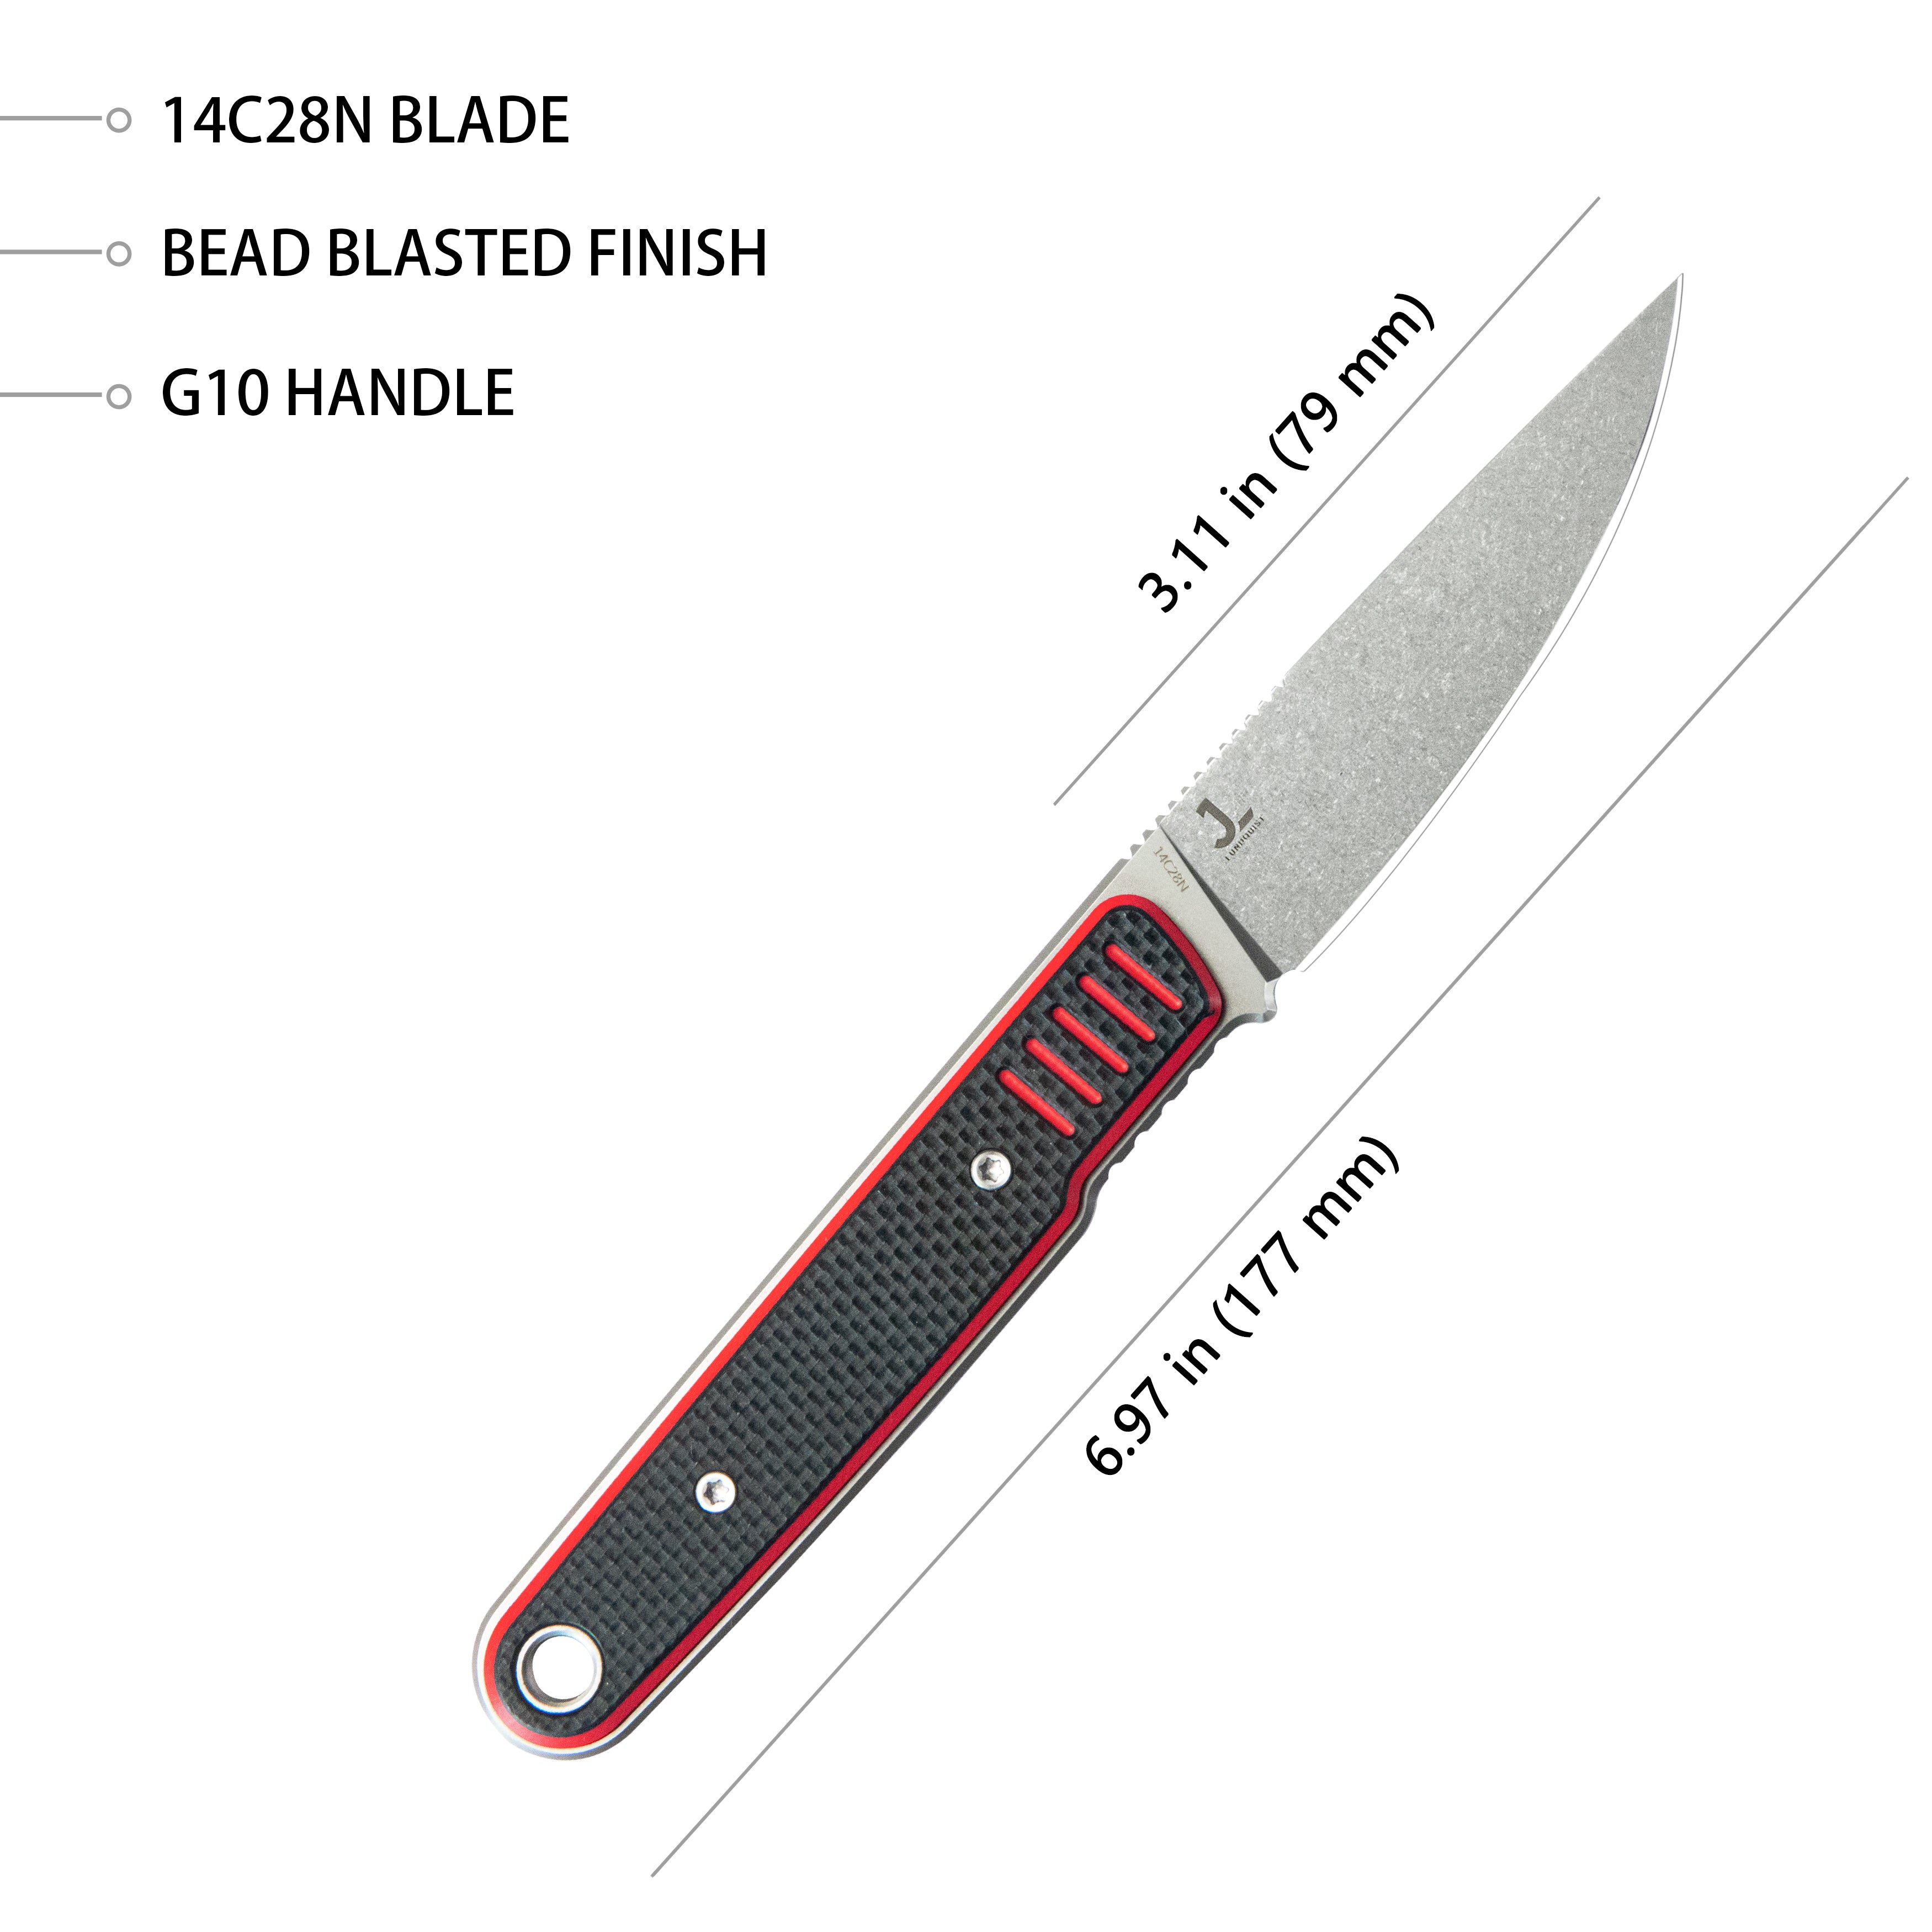 Kubey JL Drop Point Fixie Every Day Carry Fixed Blade Knife Red Black G-10 3.11'' Drop Point Beadblast 14C28N KU356D